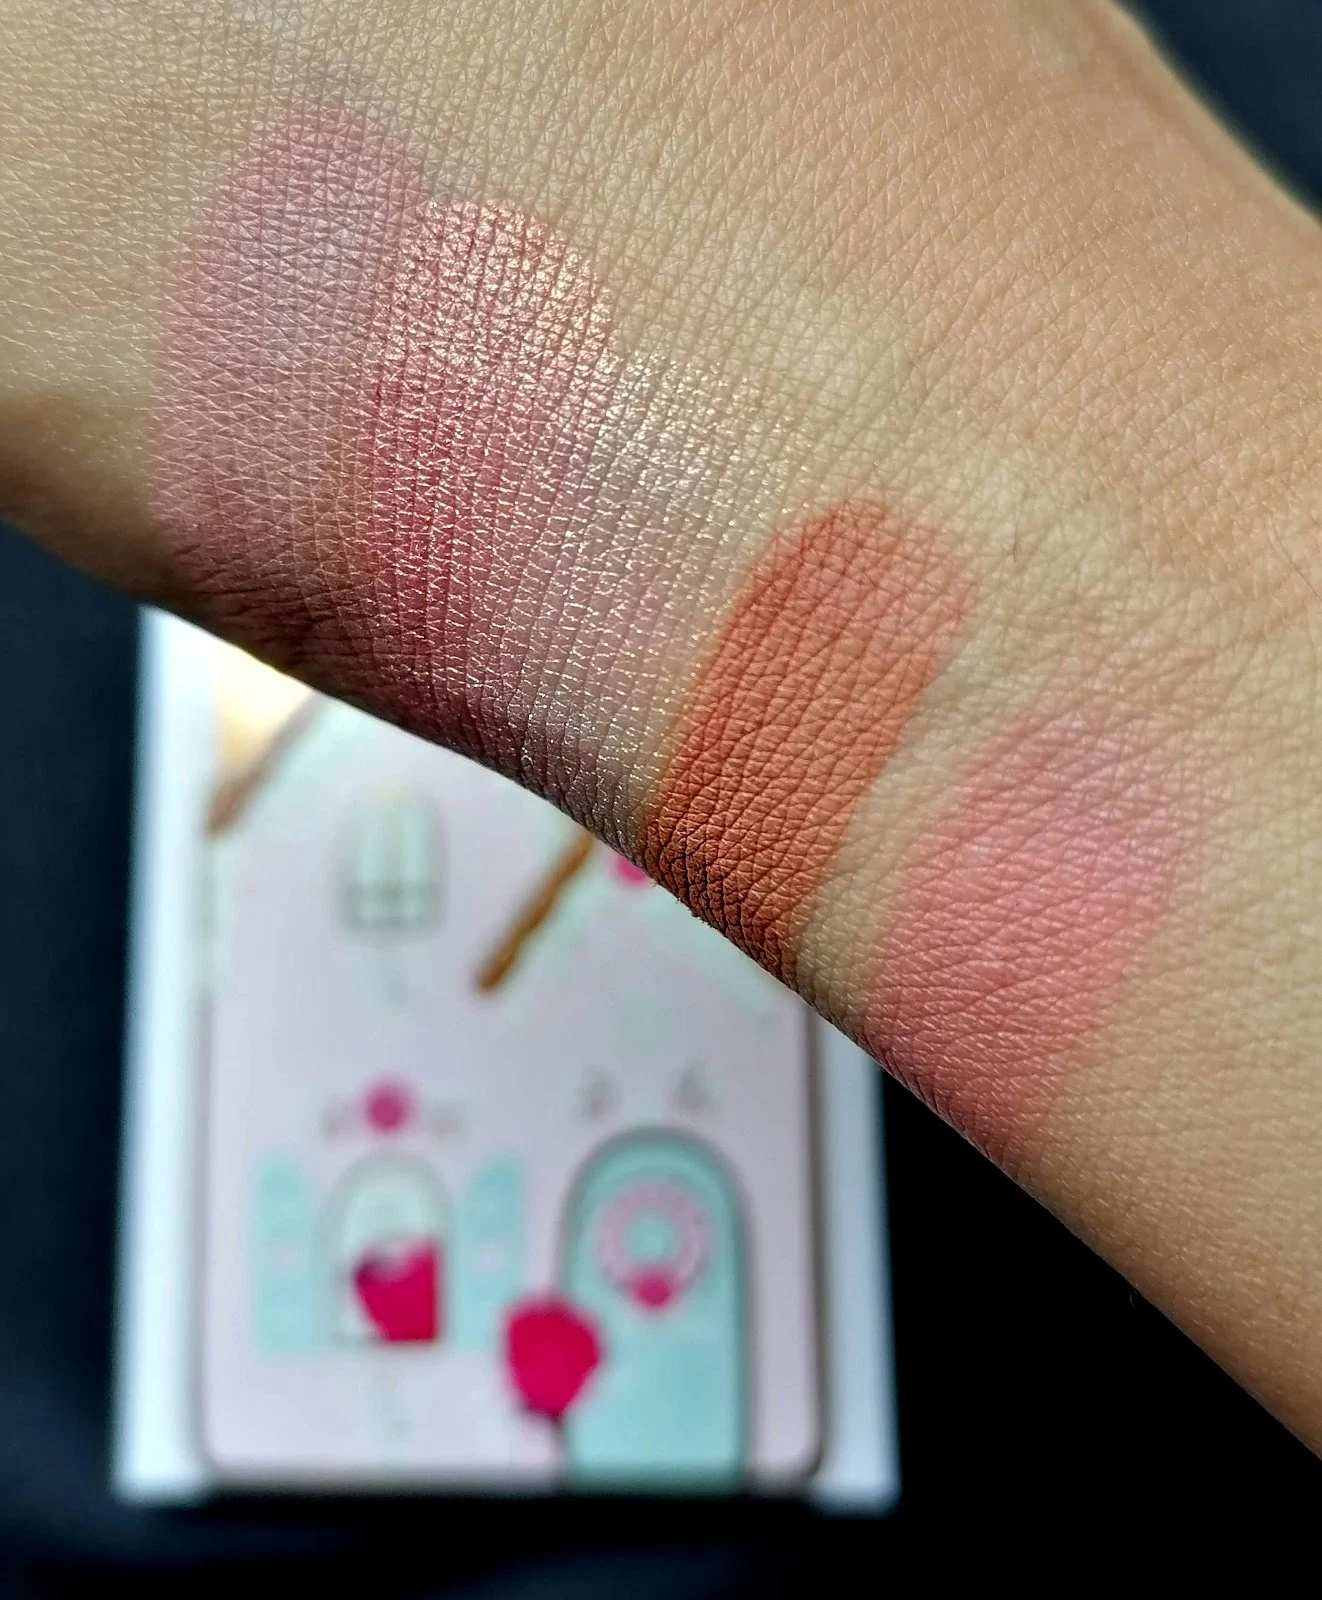 Gingerbread Lane de TOO FACED > swatch & male up